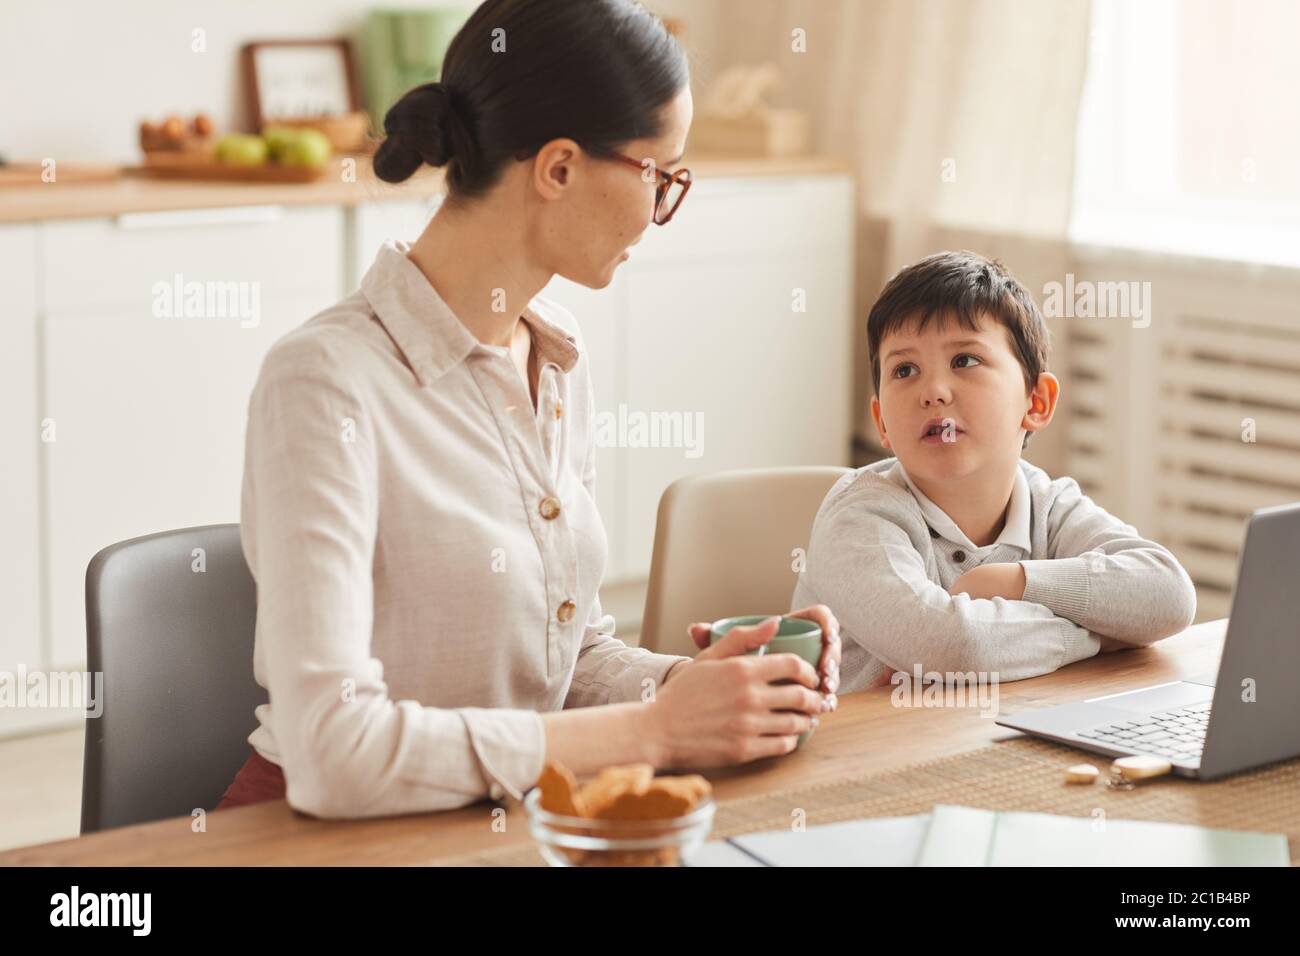 https://c8.alamy.com/comp/2C1B4BP/warm-toned-portrait-of-young-mother-talking-to-son-while-doing-homework-together-sitting-at-table-in-cozy-kitchen-interior-copy-space-2C1B4BP.jpg